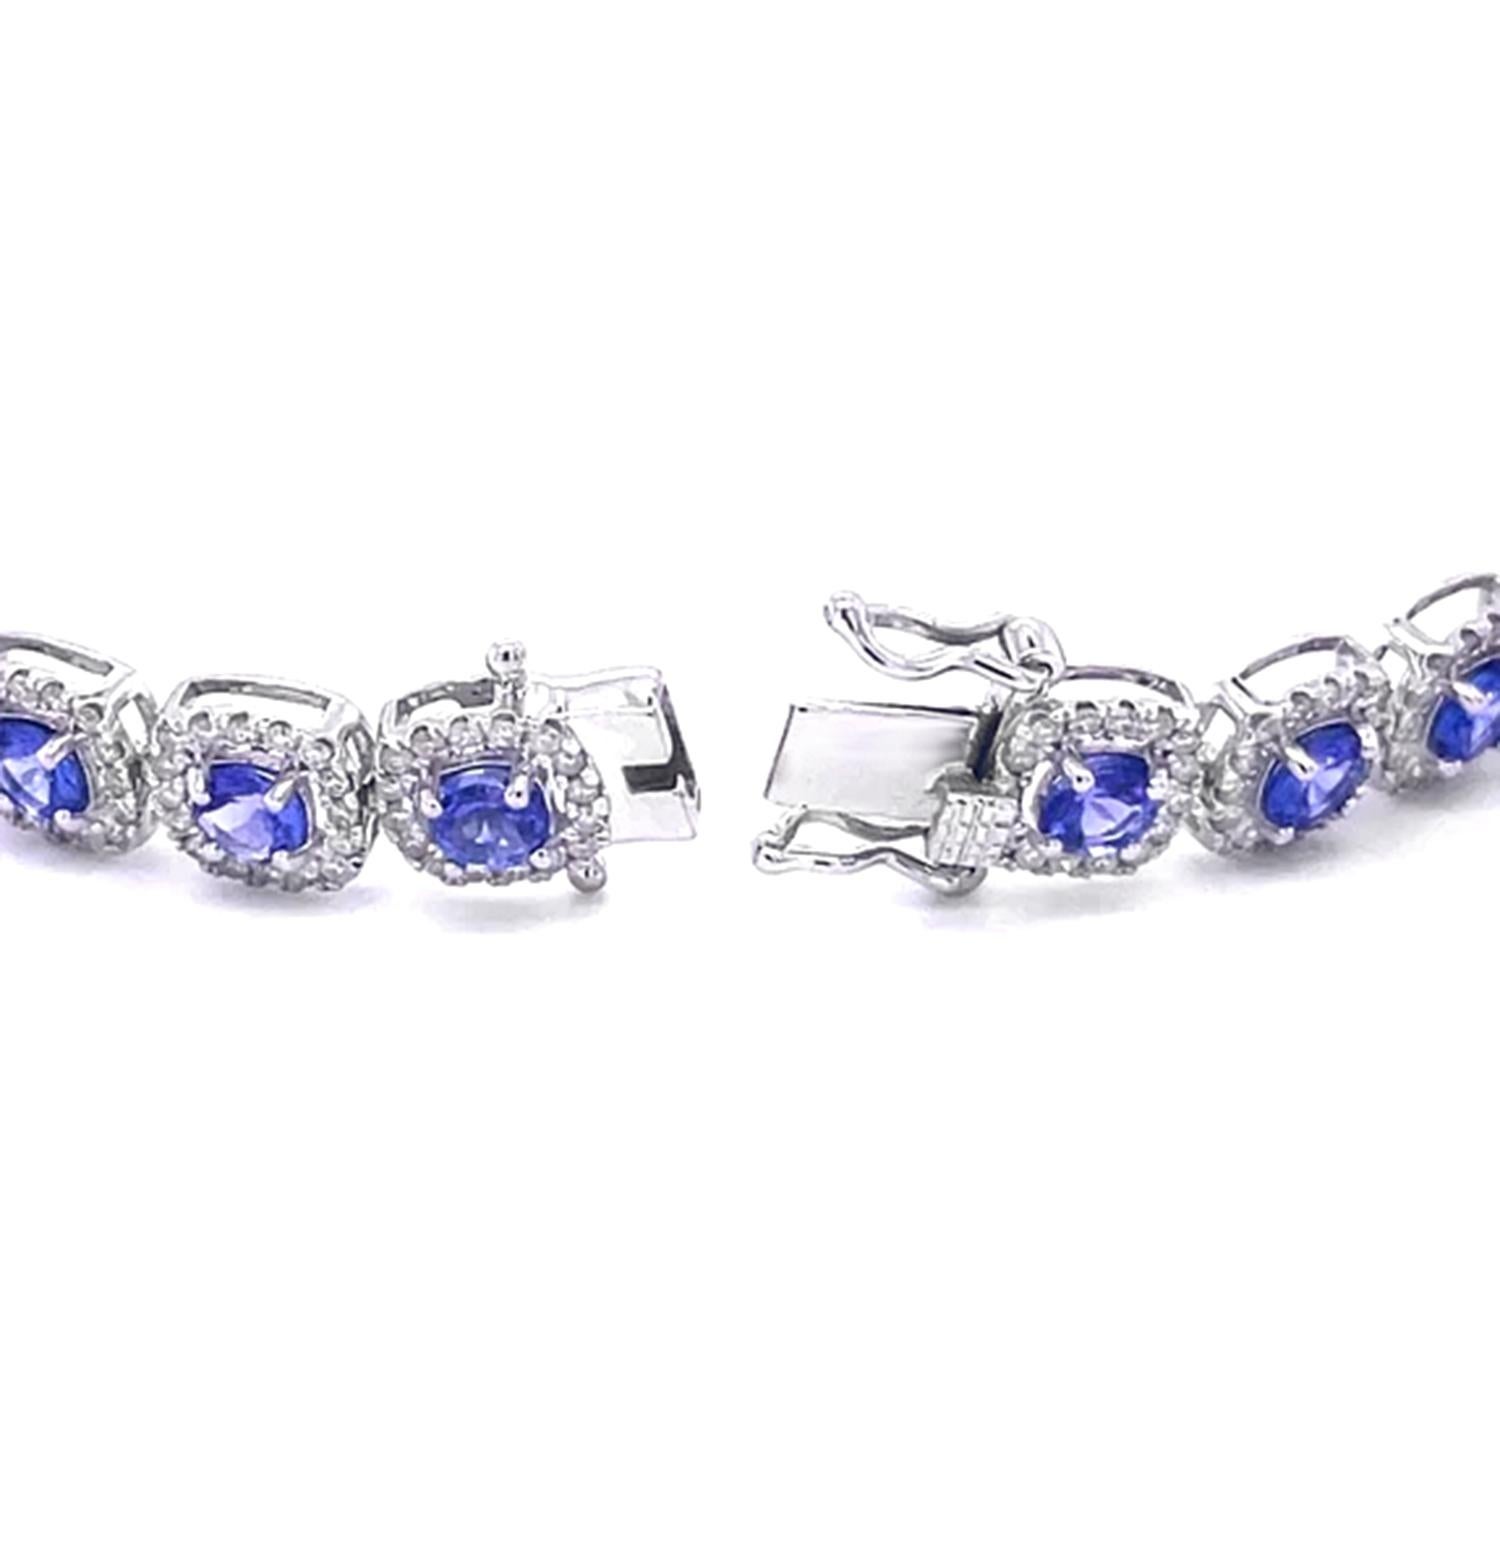 Contemporary Tanzanite Bracelet With Diamonds 8.40 Carats 14K White Gold For Sale